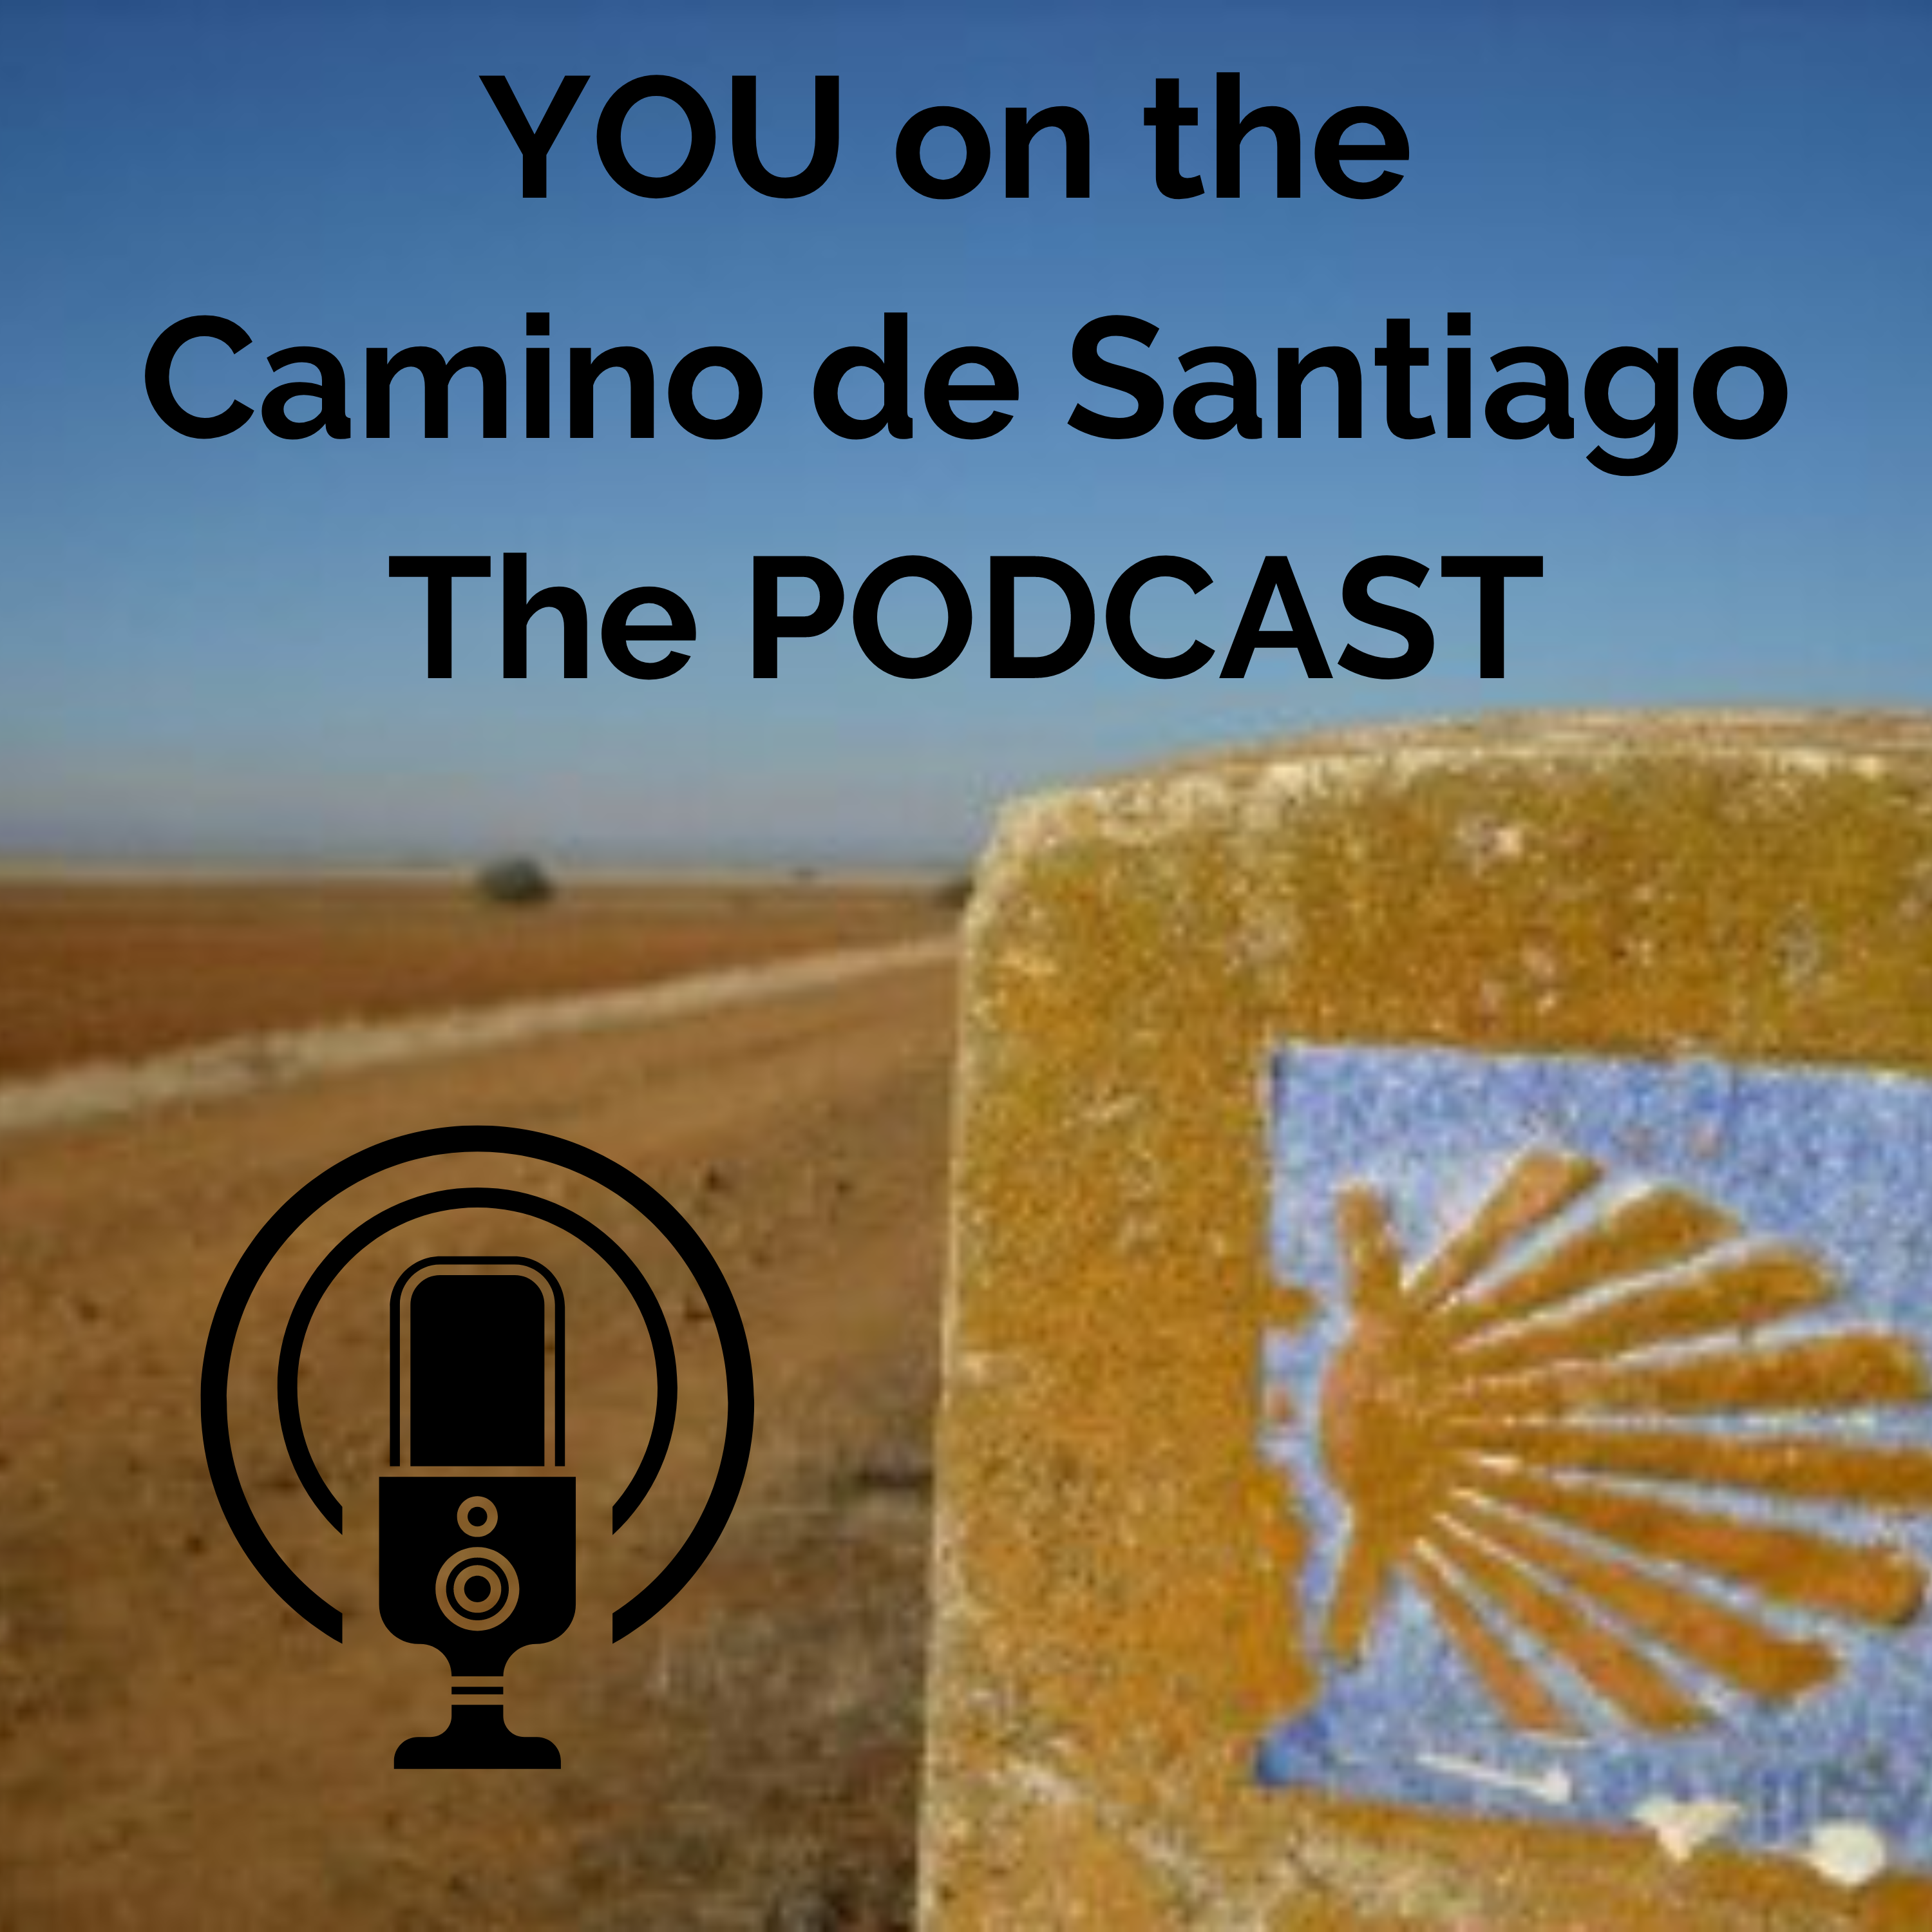 Photo of a trail marker on the Camino Frances route, with the words "YOU on the Camino de Santiago The Podcast"